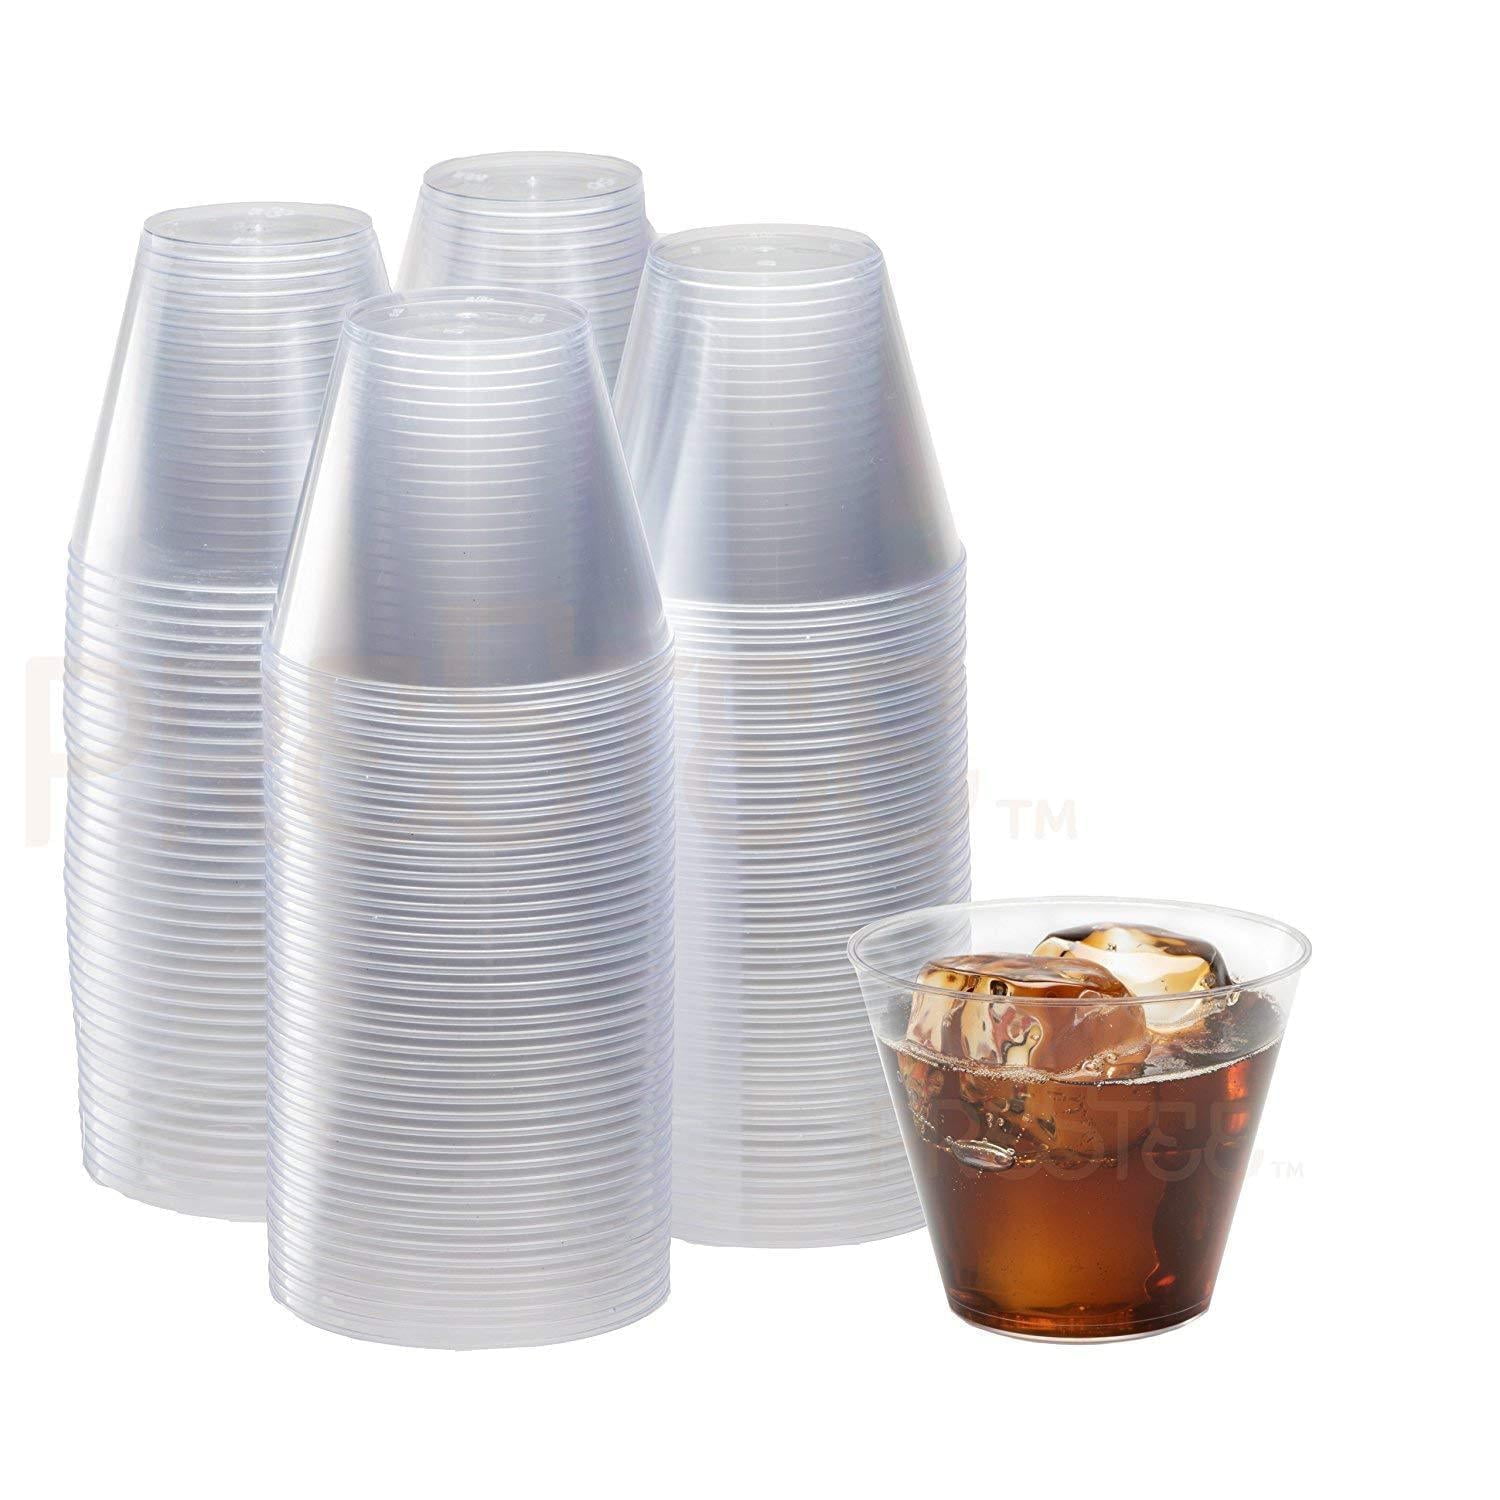 JoyServe Clear Plastic Cups - Pack of 200 Bulk, 3 oz Disposable Drink Cups, Small Plastic Party Cup for Drinks, Water, Mouthwash, Jello, Juice, Iced